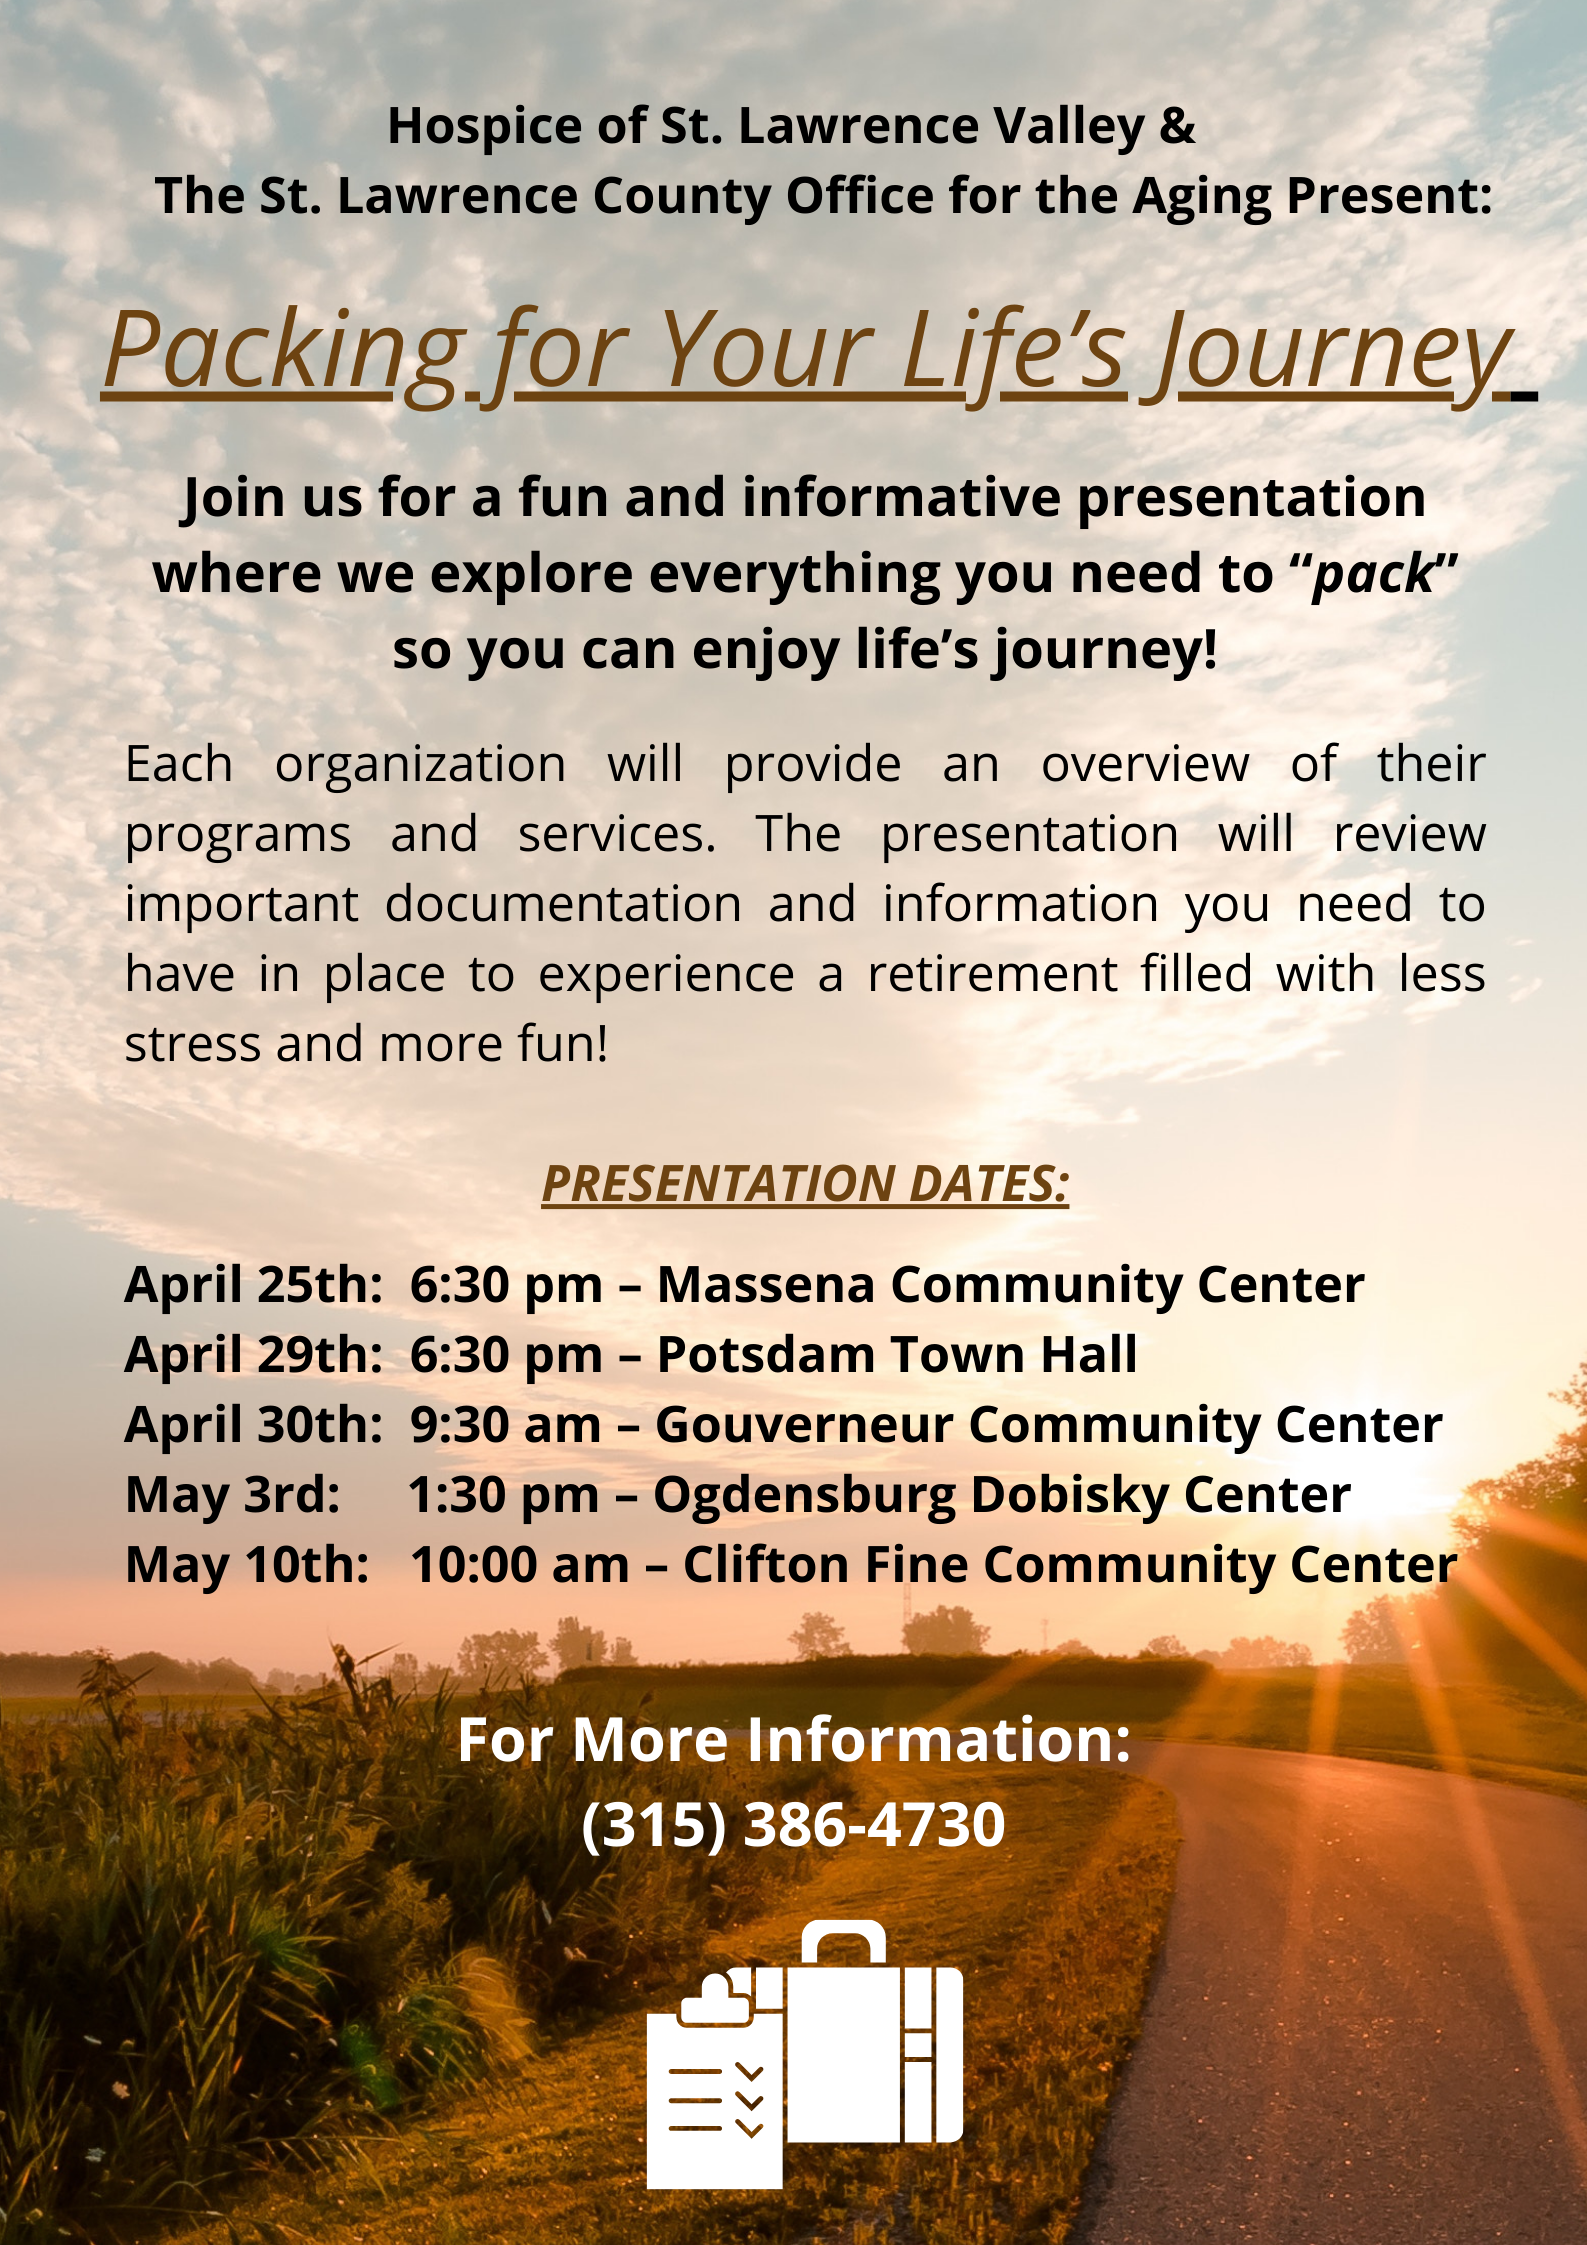 Planning for Your Life's Journey